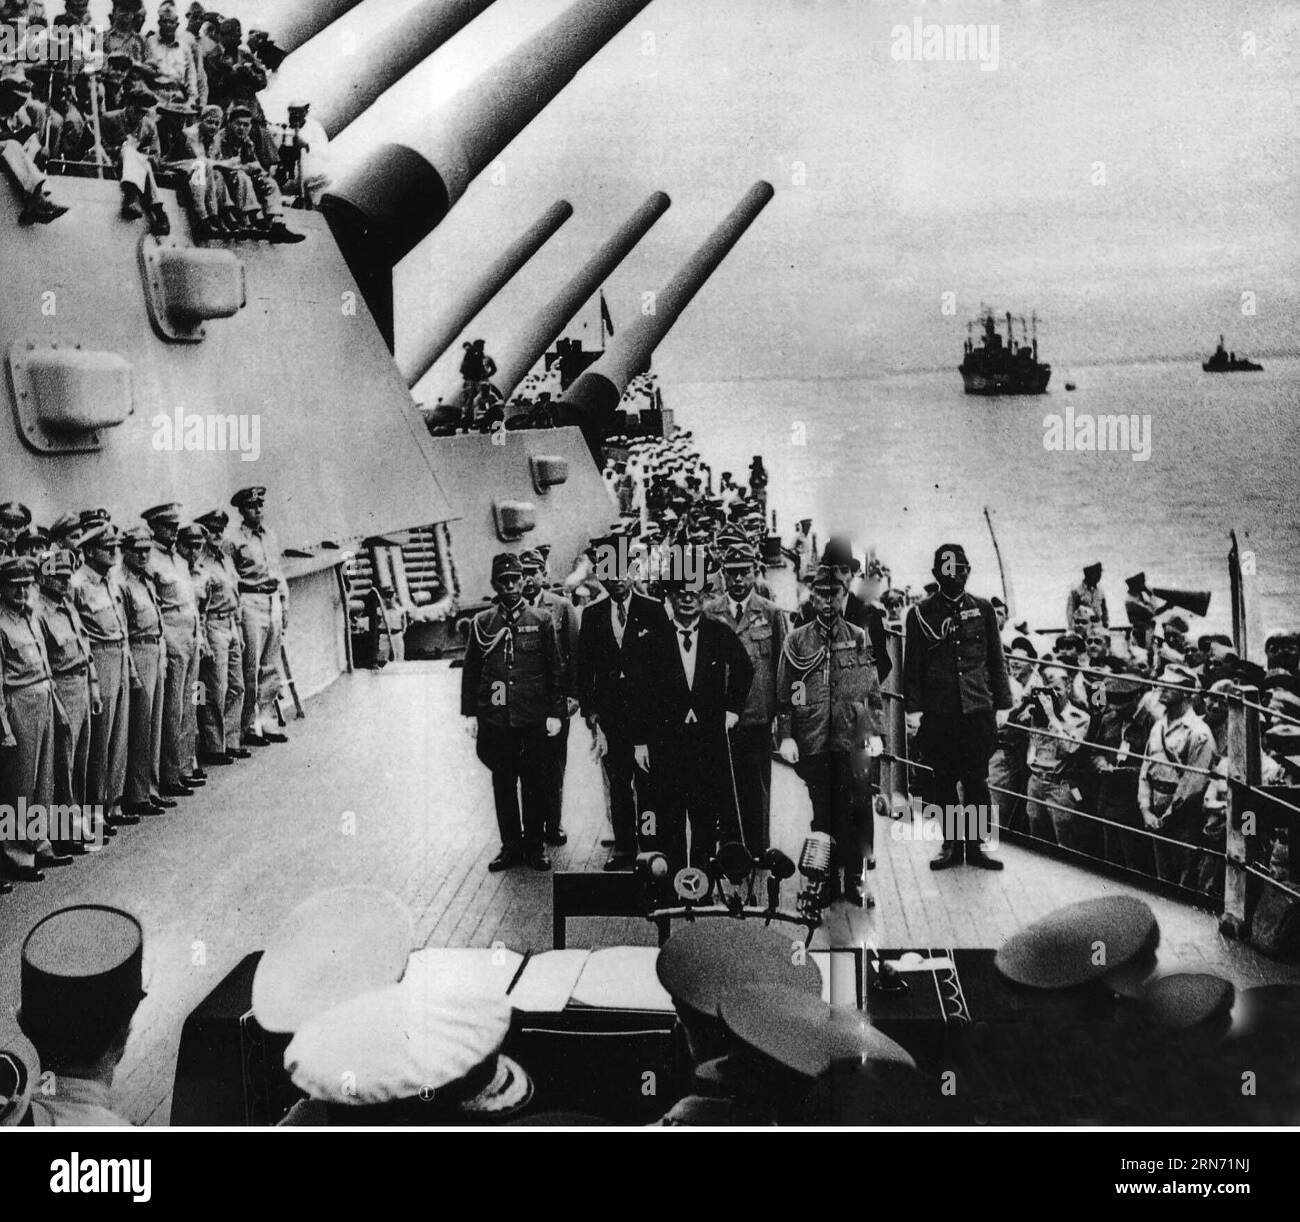 File photo taken on Sept. 2, 1945 shows Japan s surrender ceremony aboard the United States Navy battleship USS Missouri anchored in Tokyo Bay. On Aug. 15, 1945, Japanese Emperor Hirohito delivered a recorded radio address to the nation, announcing the surrender of Japan in World War II, one day after Japan declared its acceptance of the provisions of the Potsdam Proclamation jointly issued by China, the United States and Britain on July 26, 1945, with the Soviet Union joining later. The proclamation, which radicated Japan s crimes of aggressions during WWII and determined the principles under Stock Photo